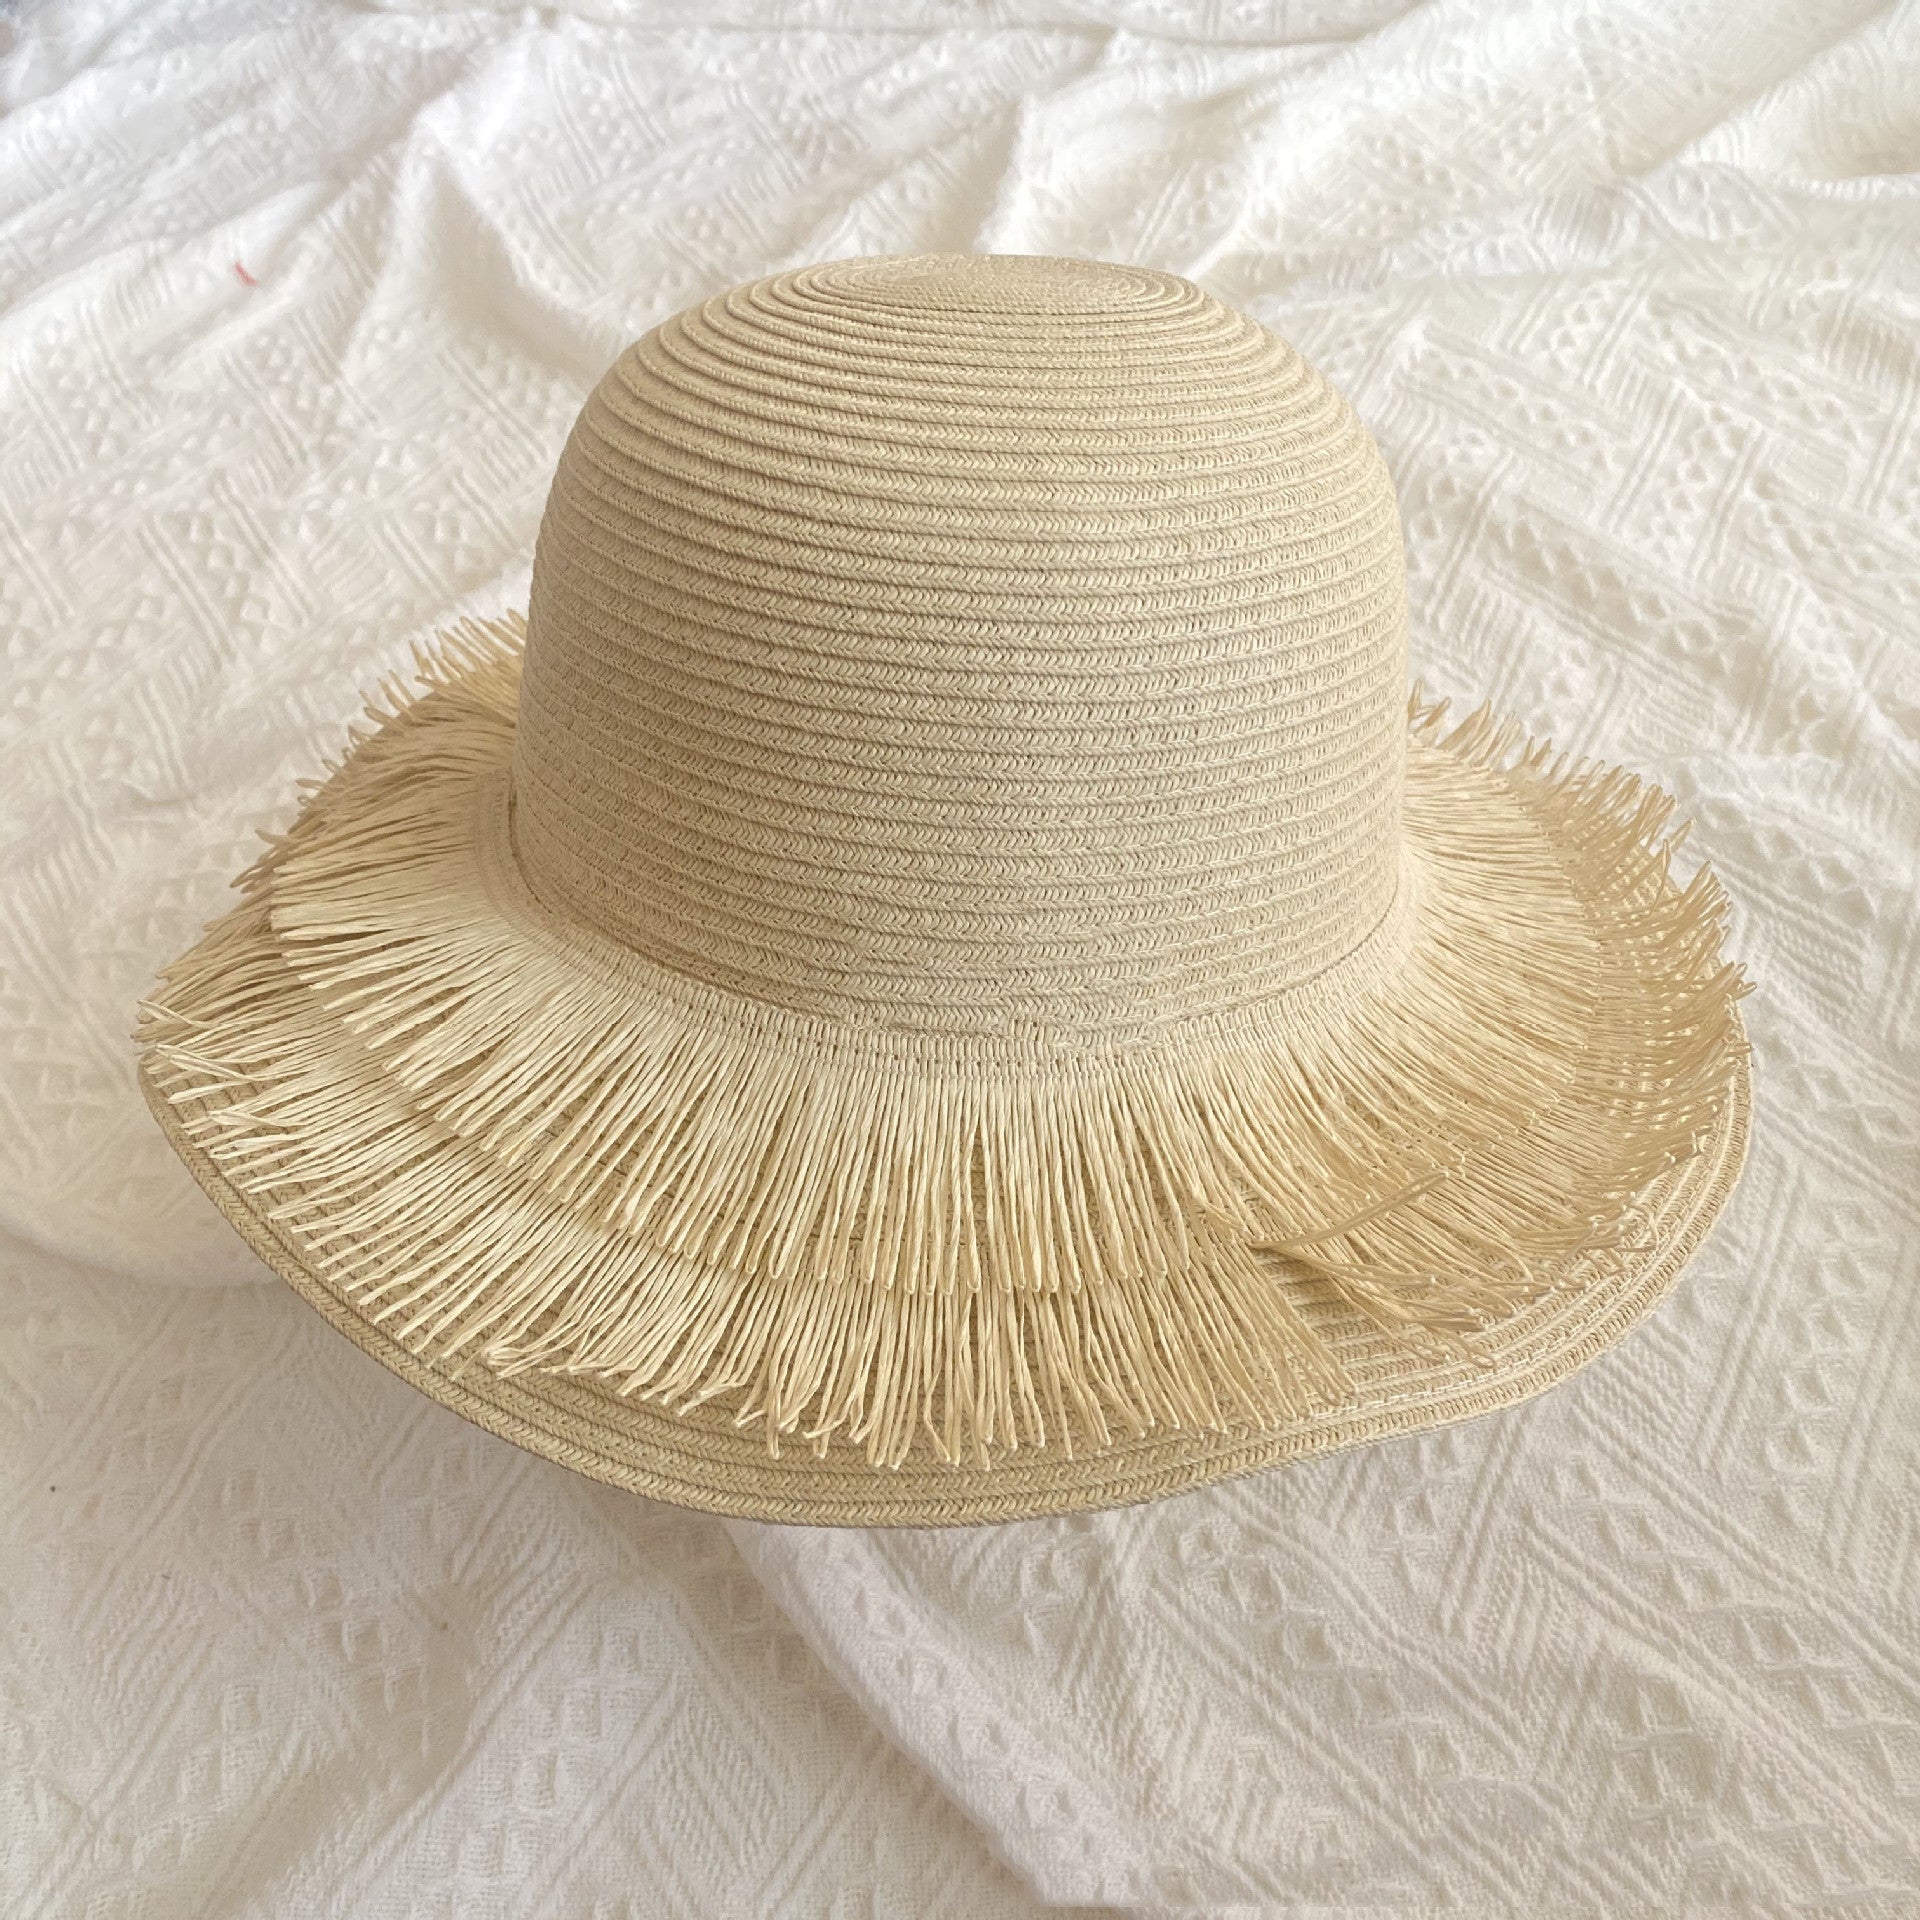 A Fringed Designed Seaside Beach Straw Hat with floral finesse on top of a white bed by Beachy Cover Ups.